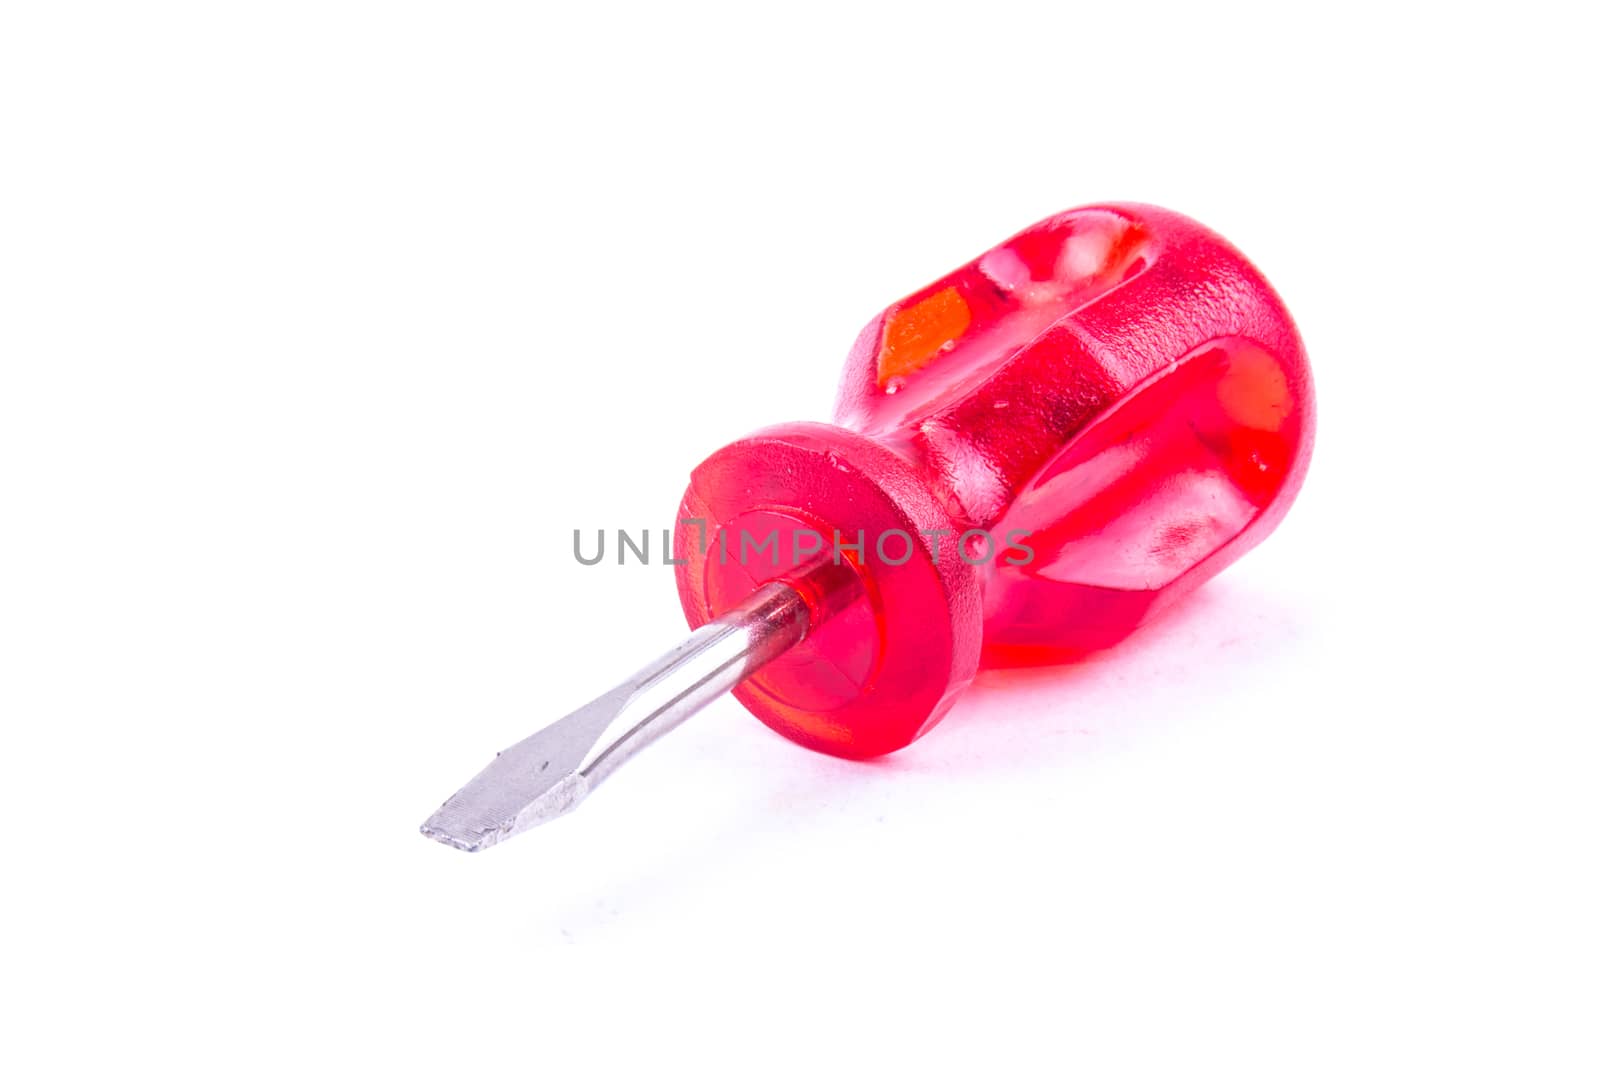 the close up red screw driver on the white background